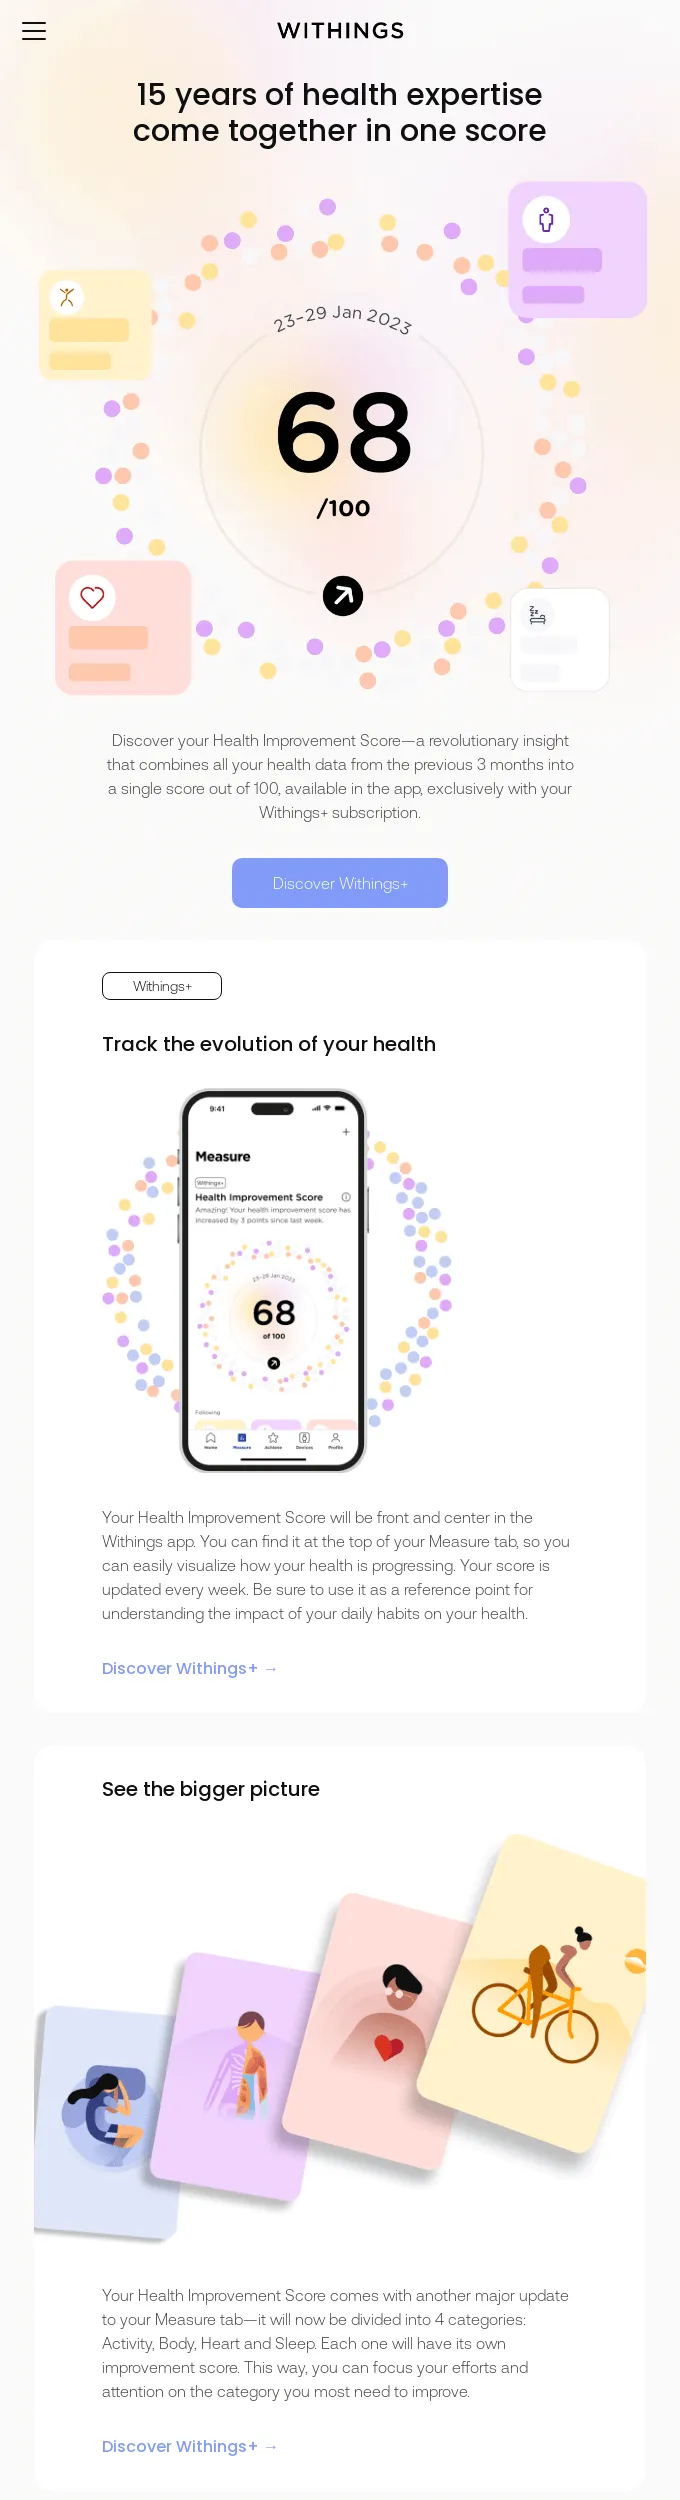 what-is-your-health-improvement-score